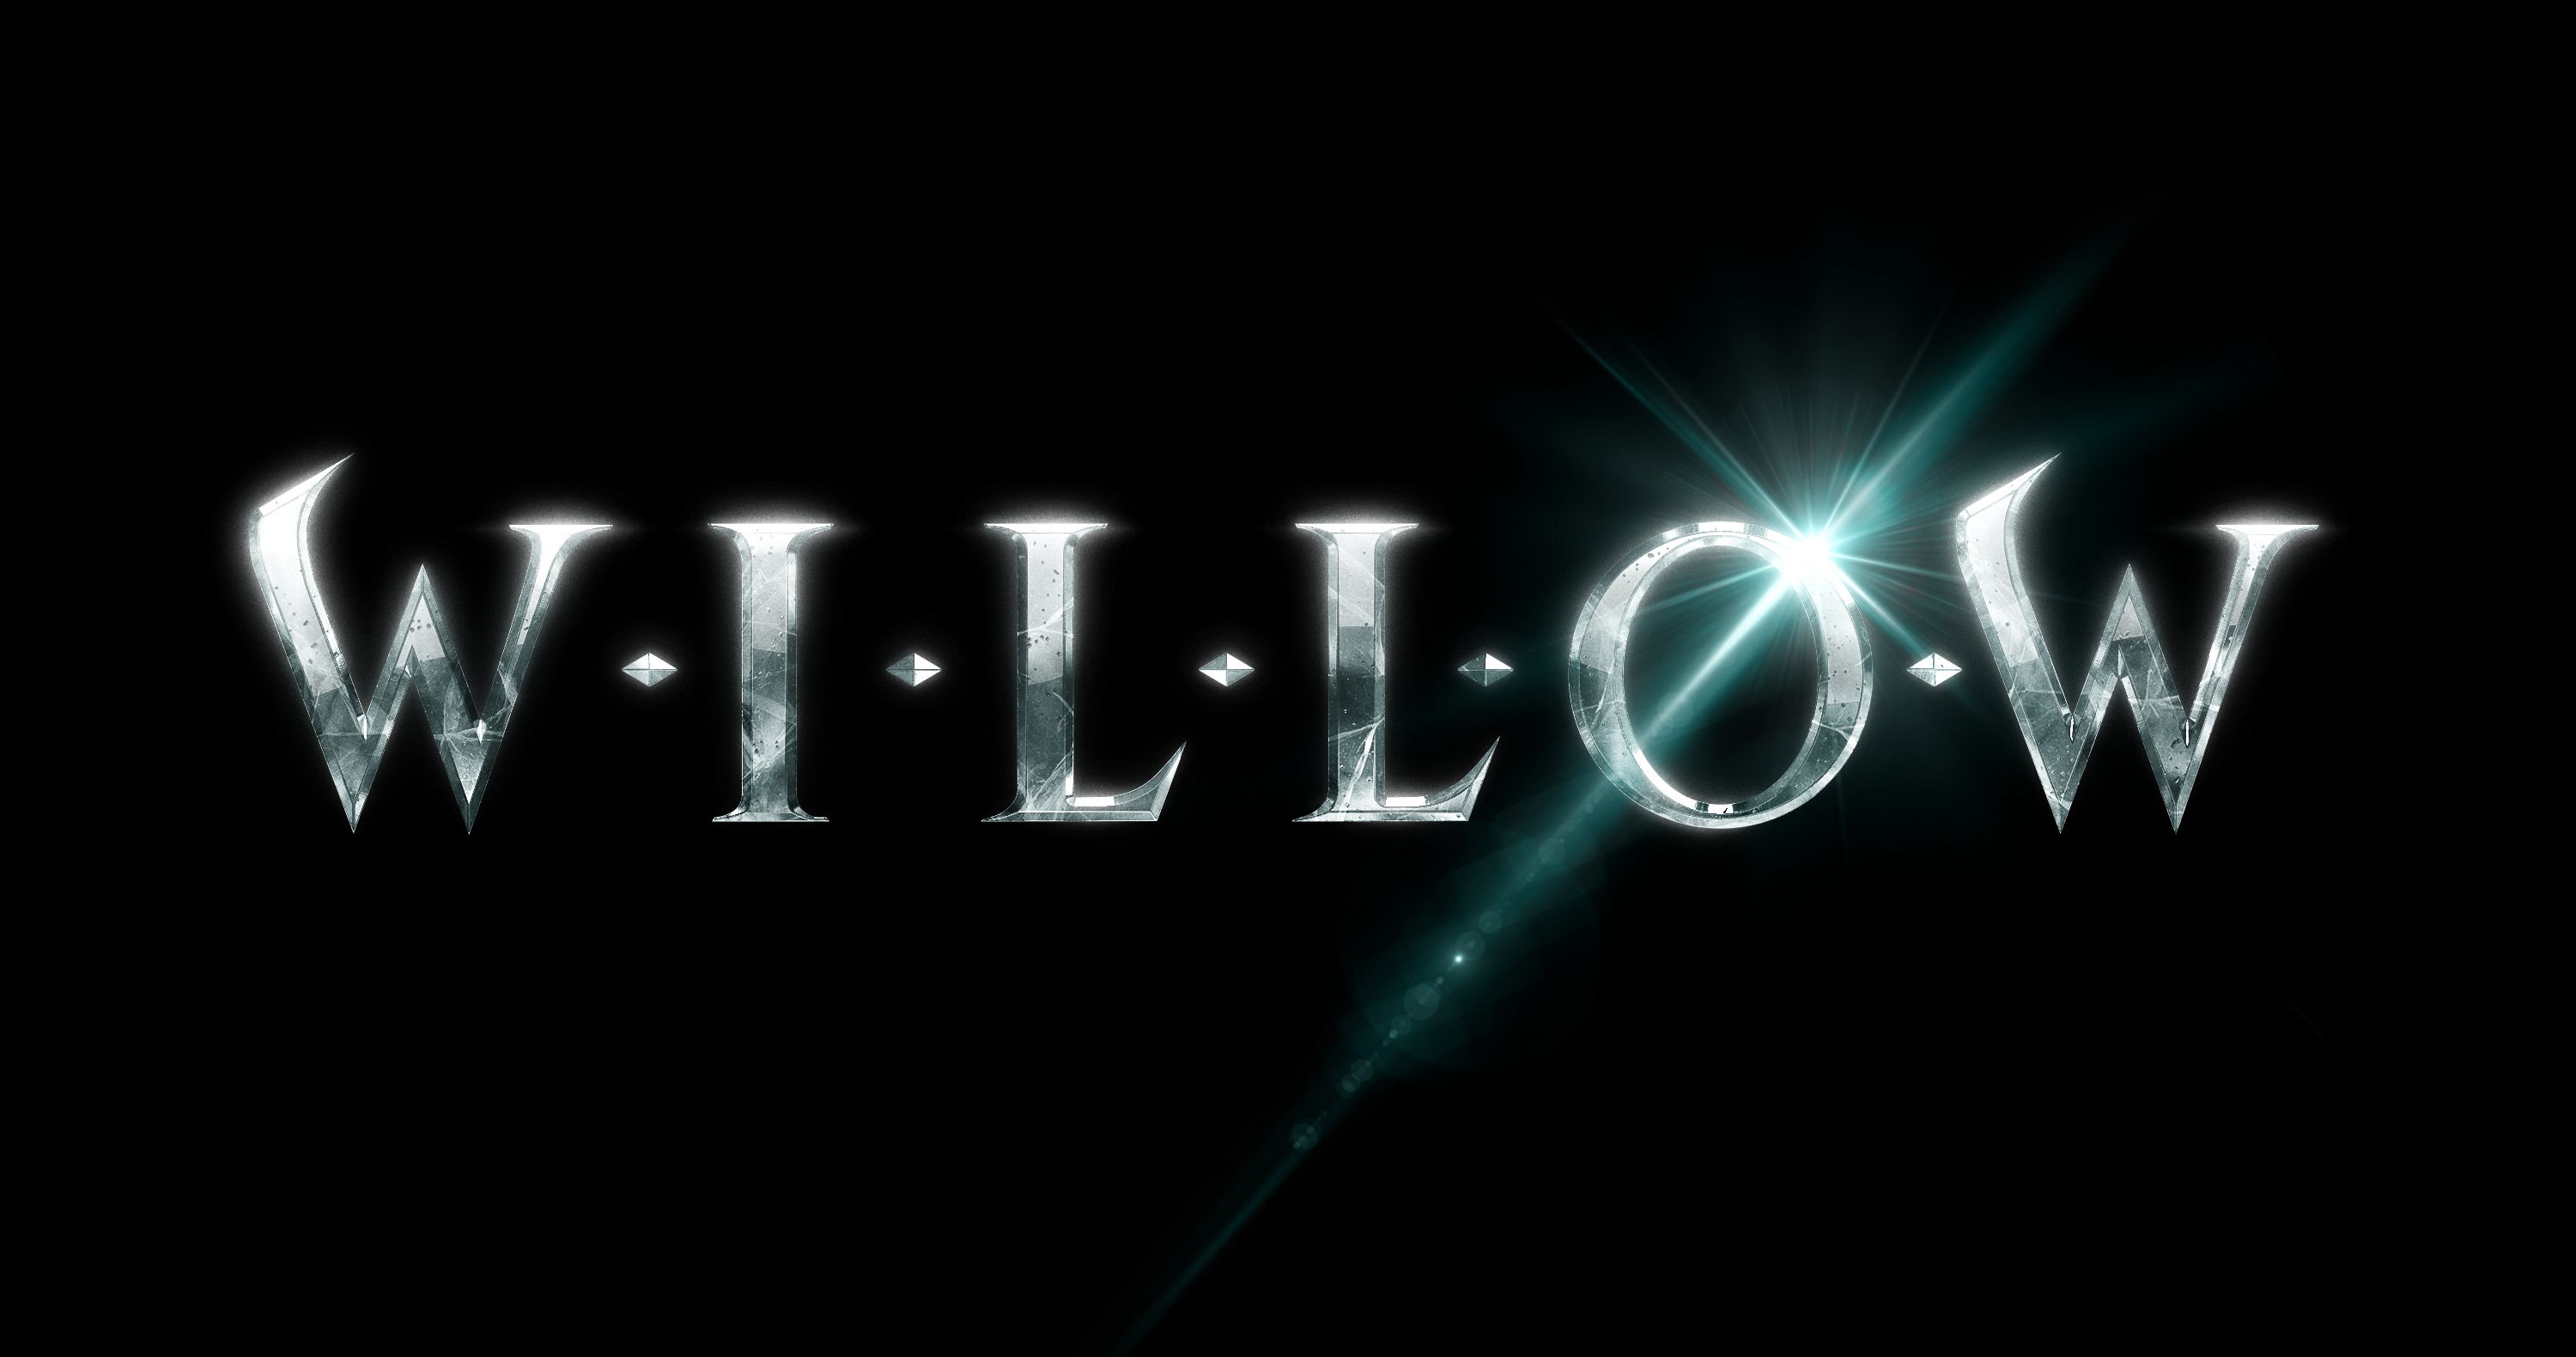 Willow Disney+ Series Gets a 2022 Release Date